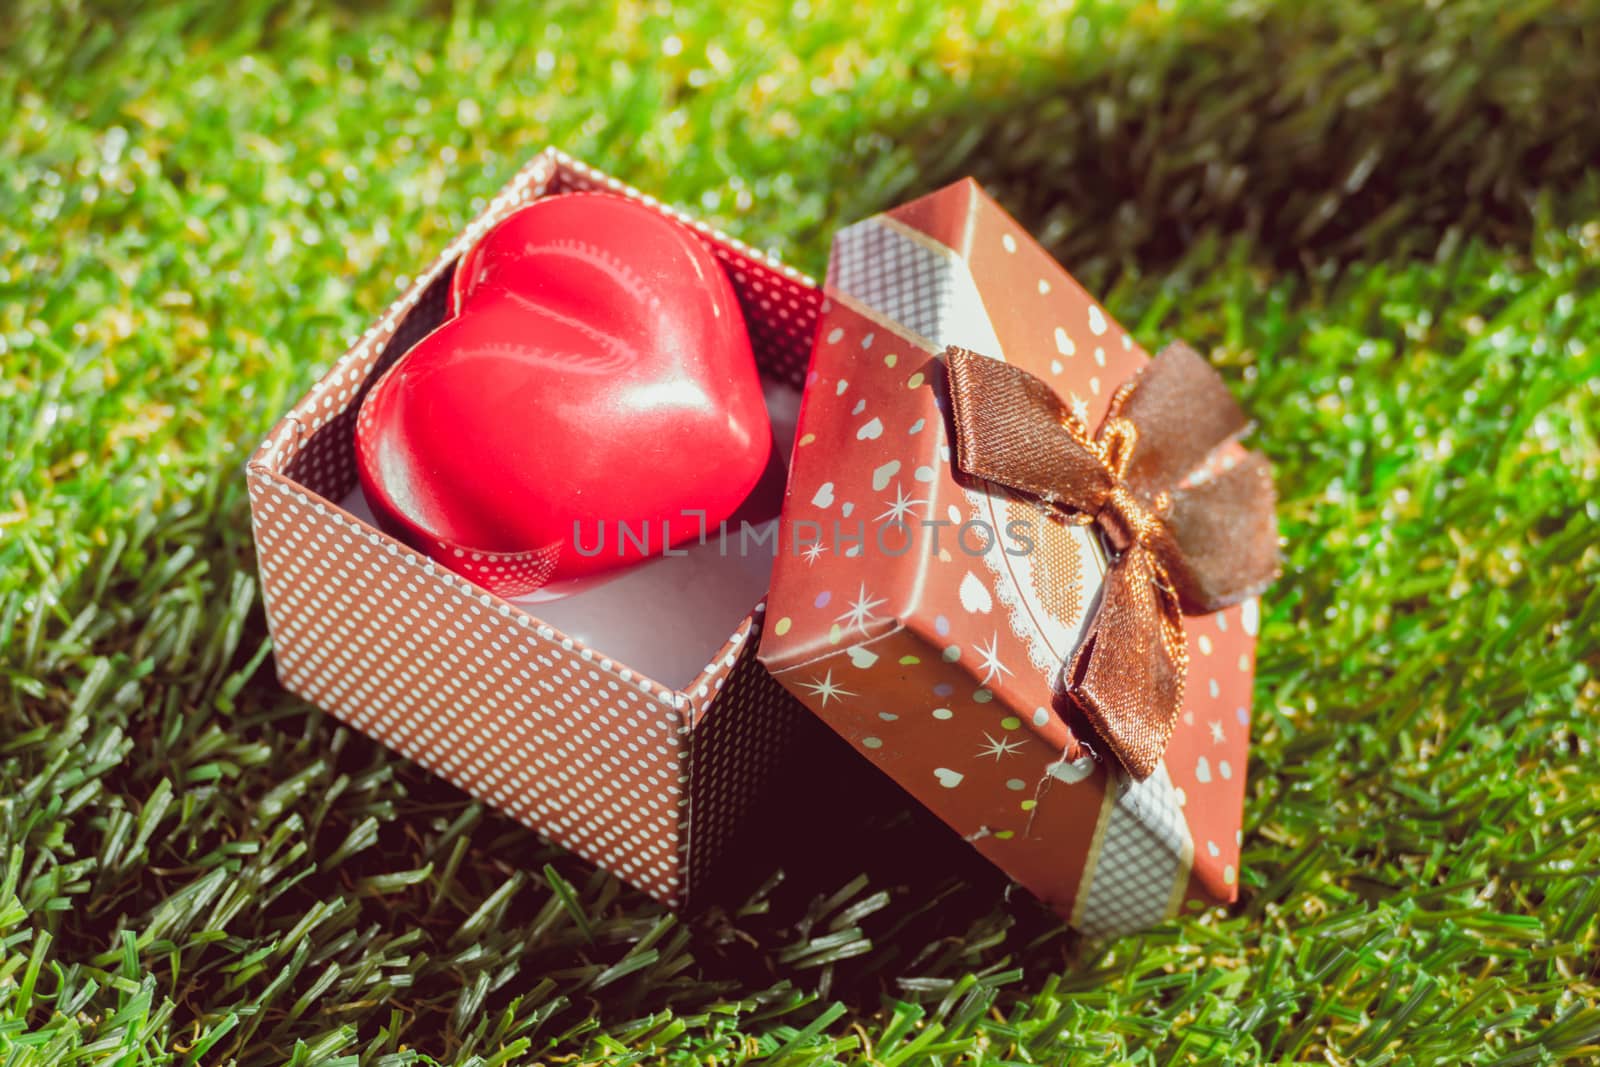 Gift of love. hearty gift. A gift box with a red heart inside. art background